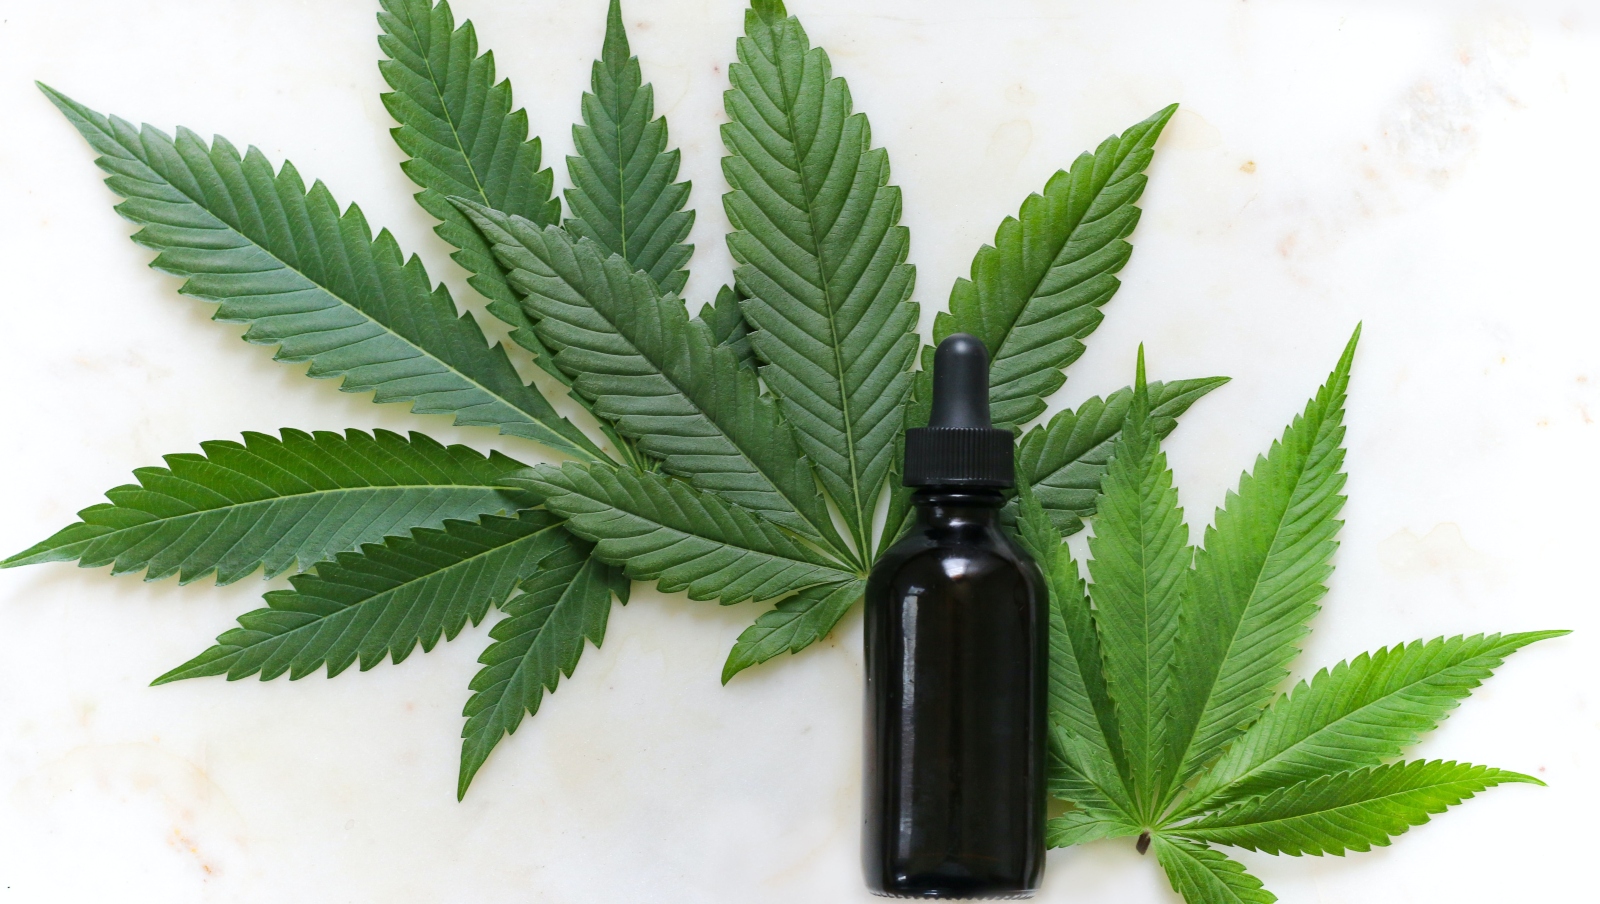 Cannabis oil was found effective in alleviating symptoms of autism in preclinical trials. Photo by Kimzy Nanney on Unsplash